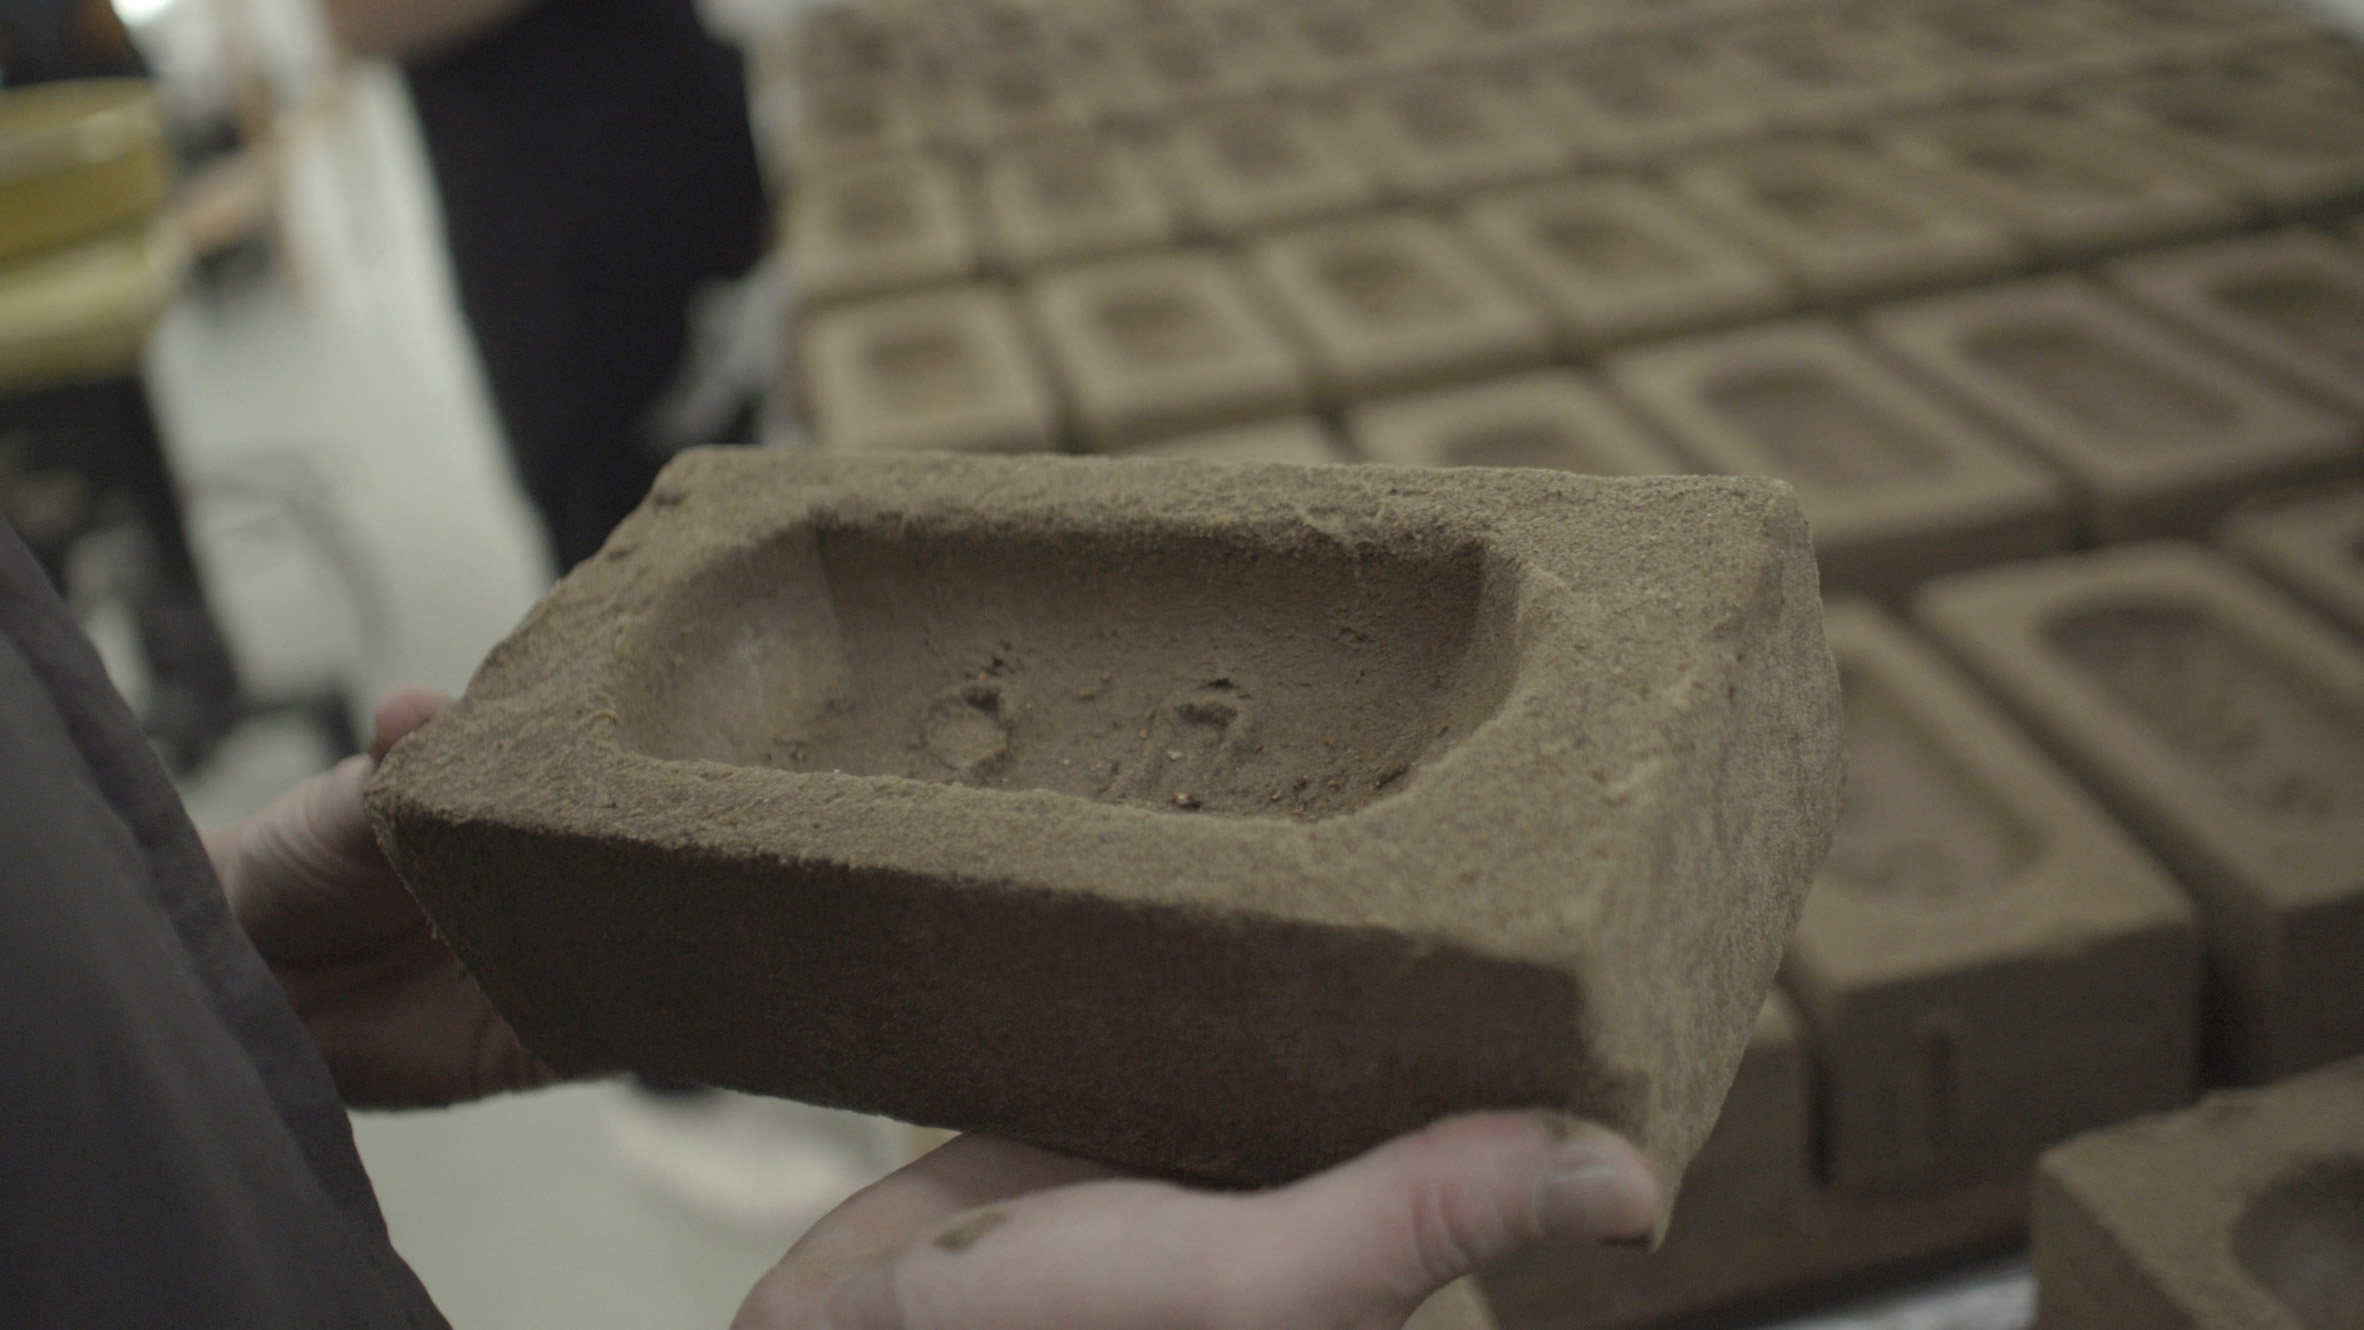 Atelier NL will use London clay to produce the Dezeen Awards trophies